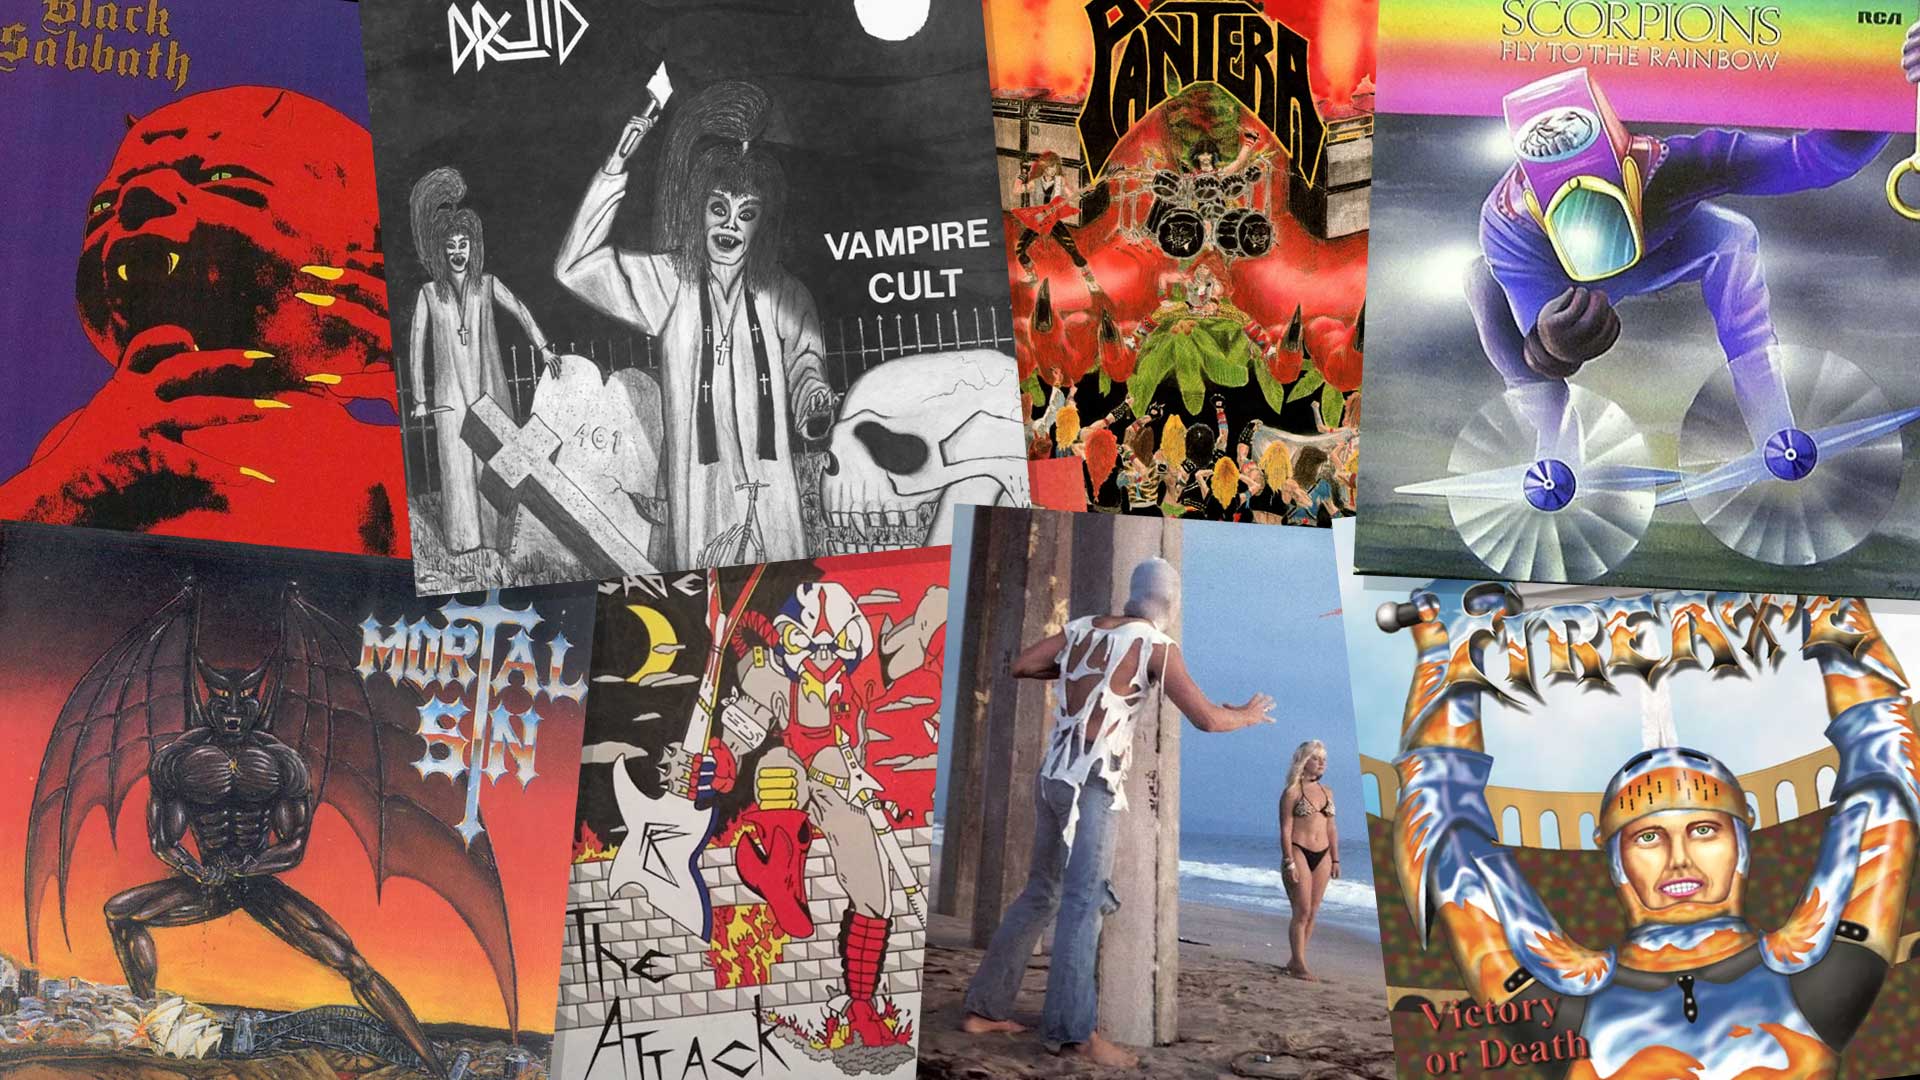 The 50 worst album covers by rock and metal bands